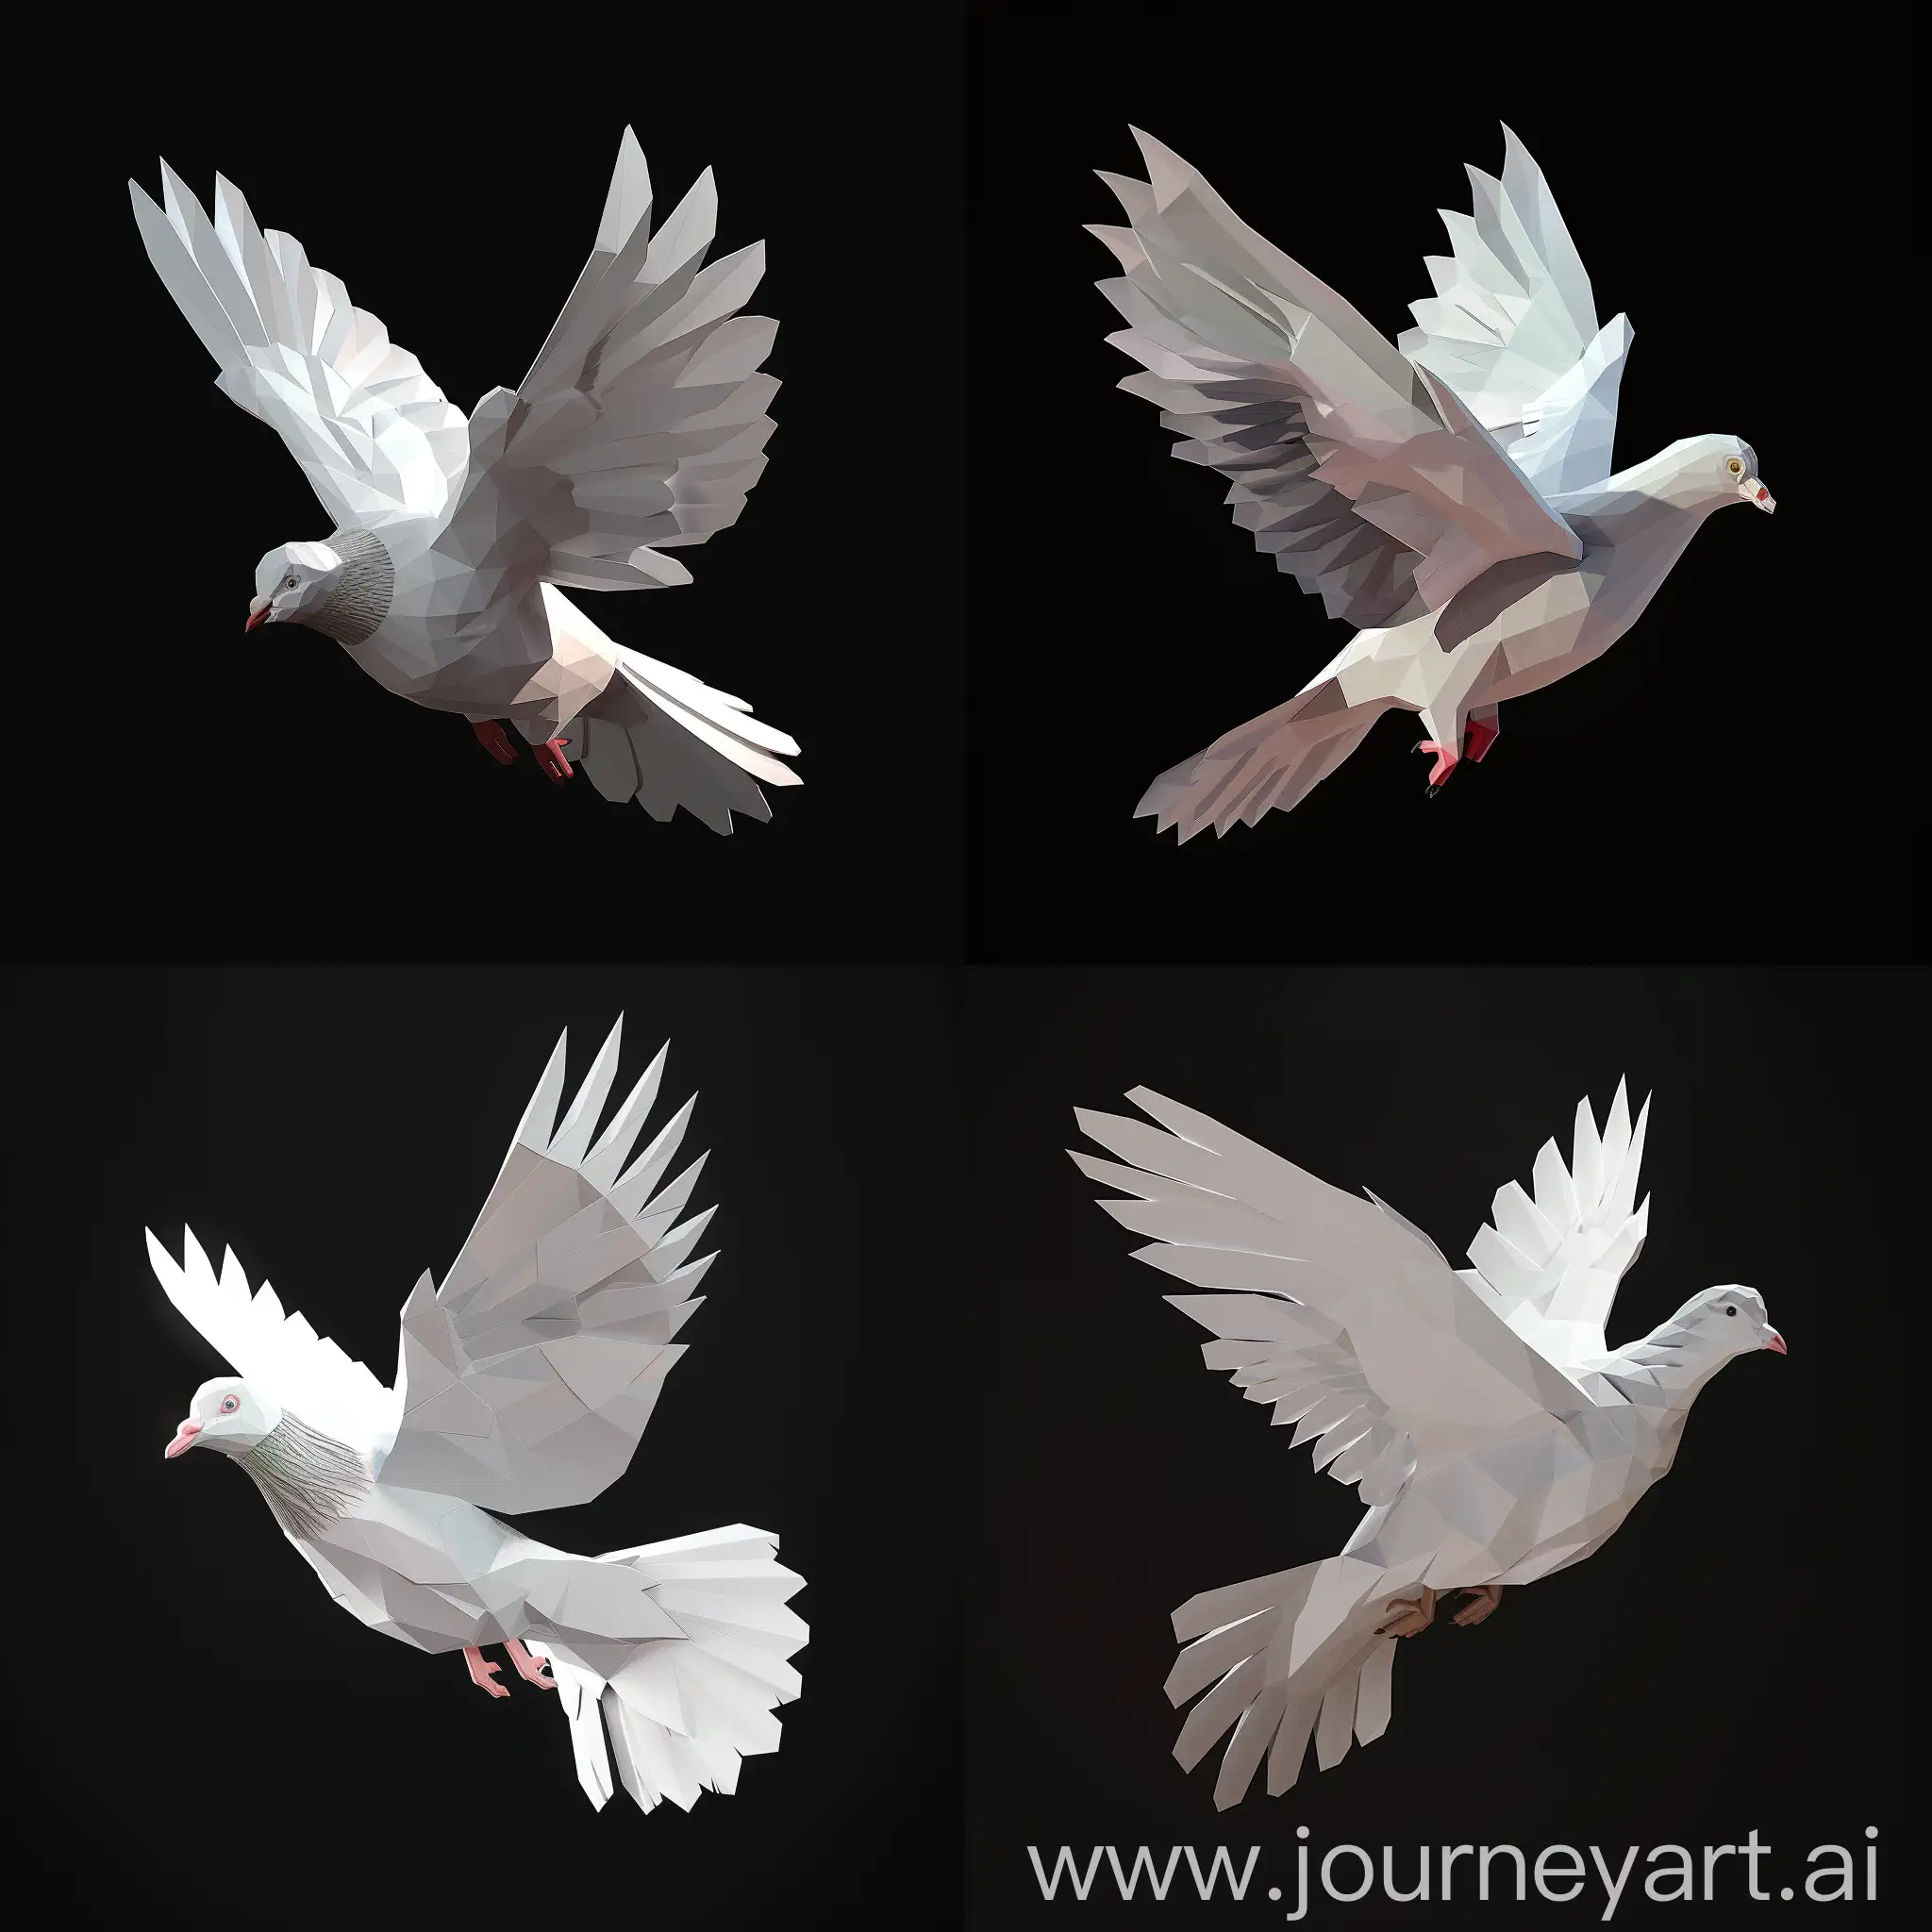 low poly flying white pigeon bird, 3d isometric render, black background, ambient occlusion, cinema 4d low poly render, unity engine